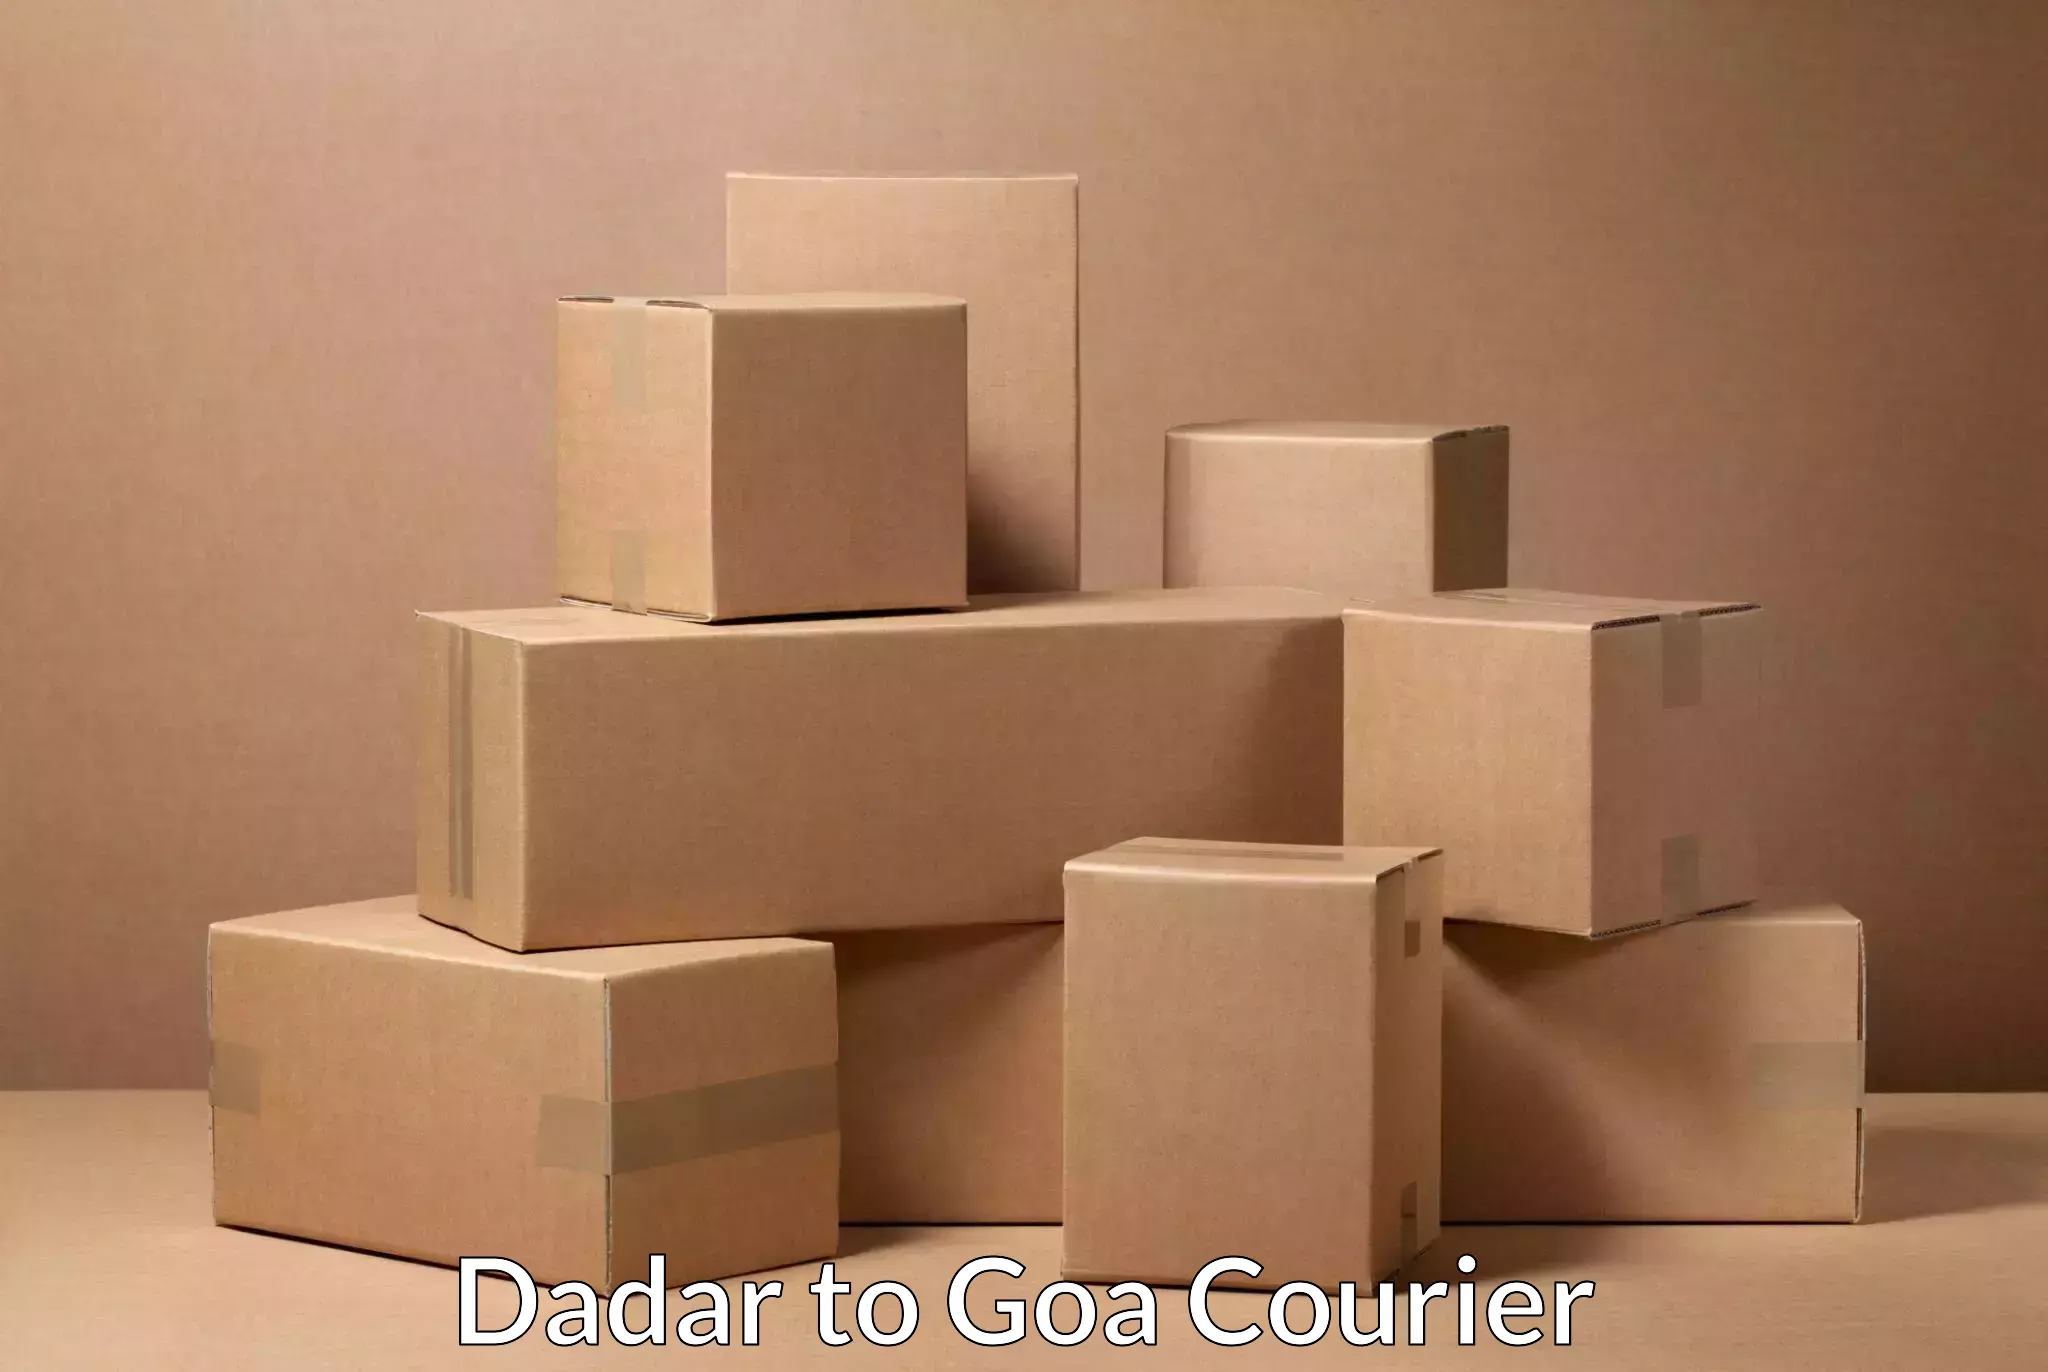 Cash on delivery service Dadar to Goa